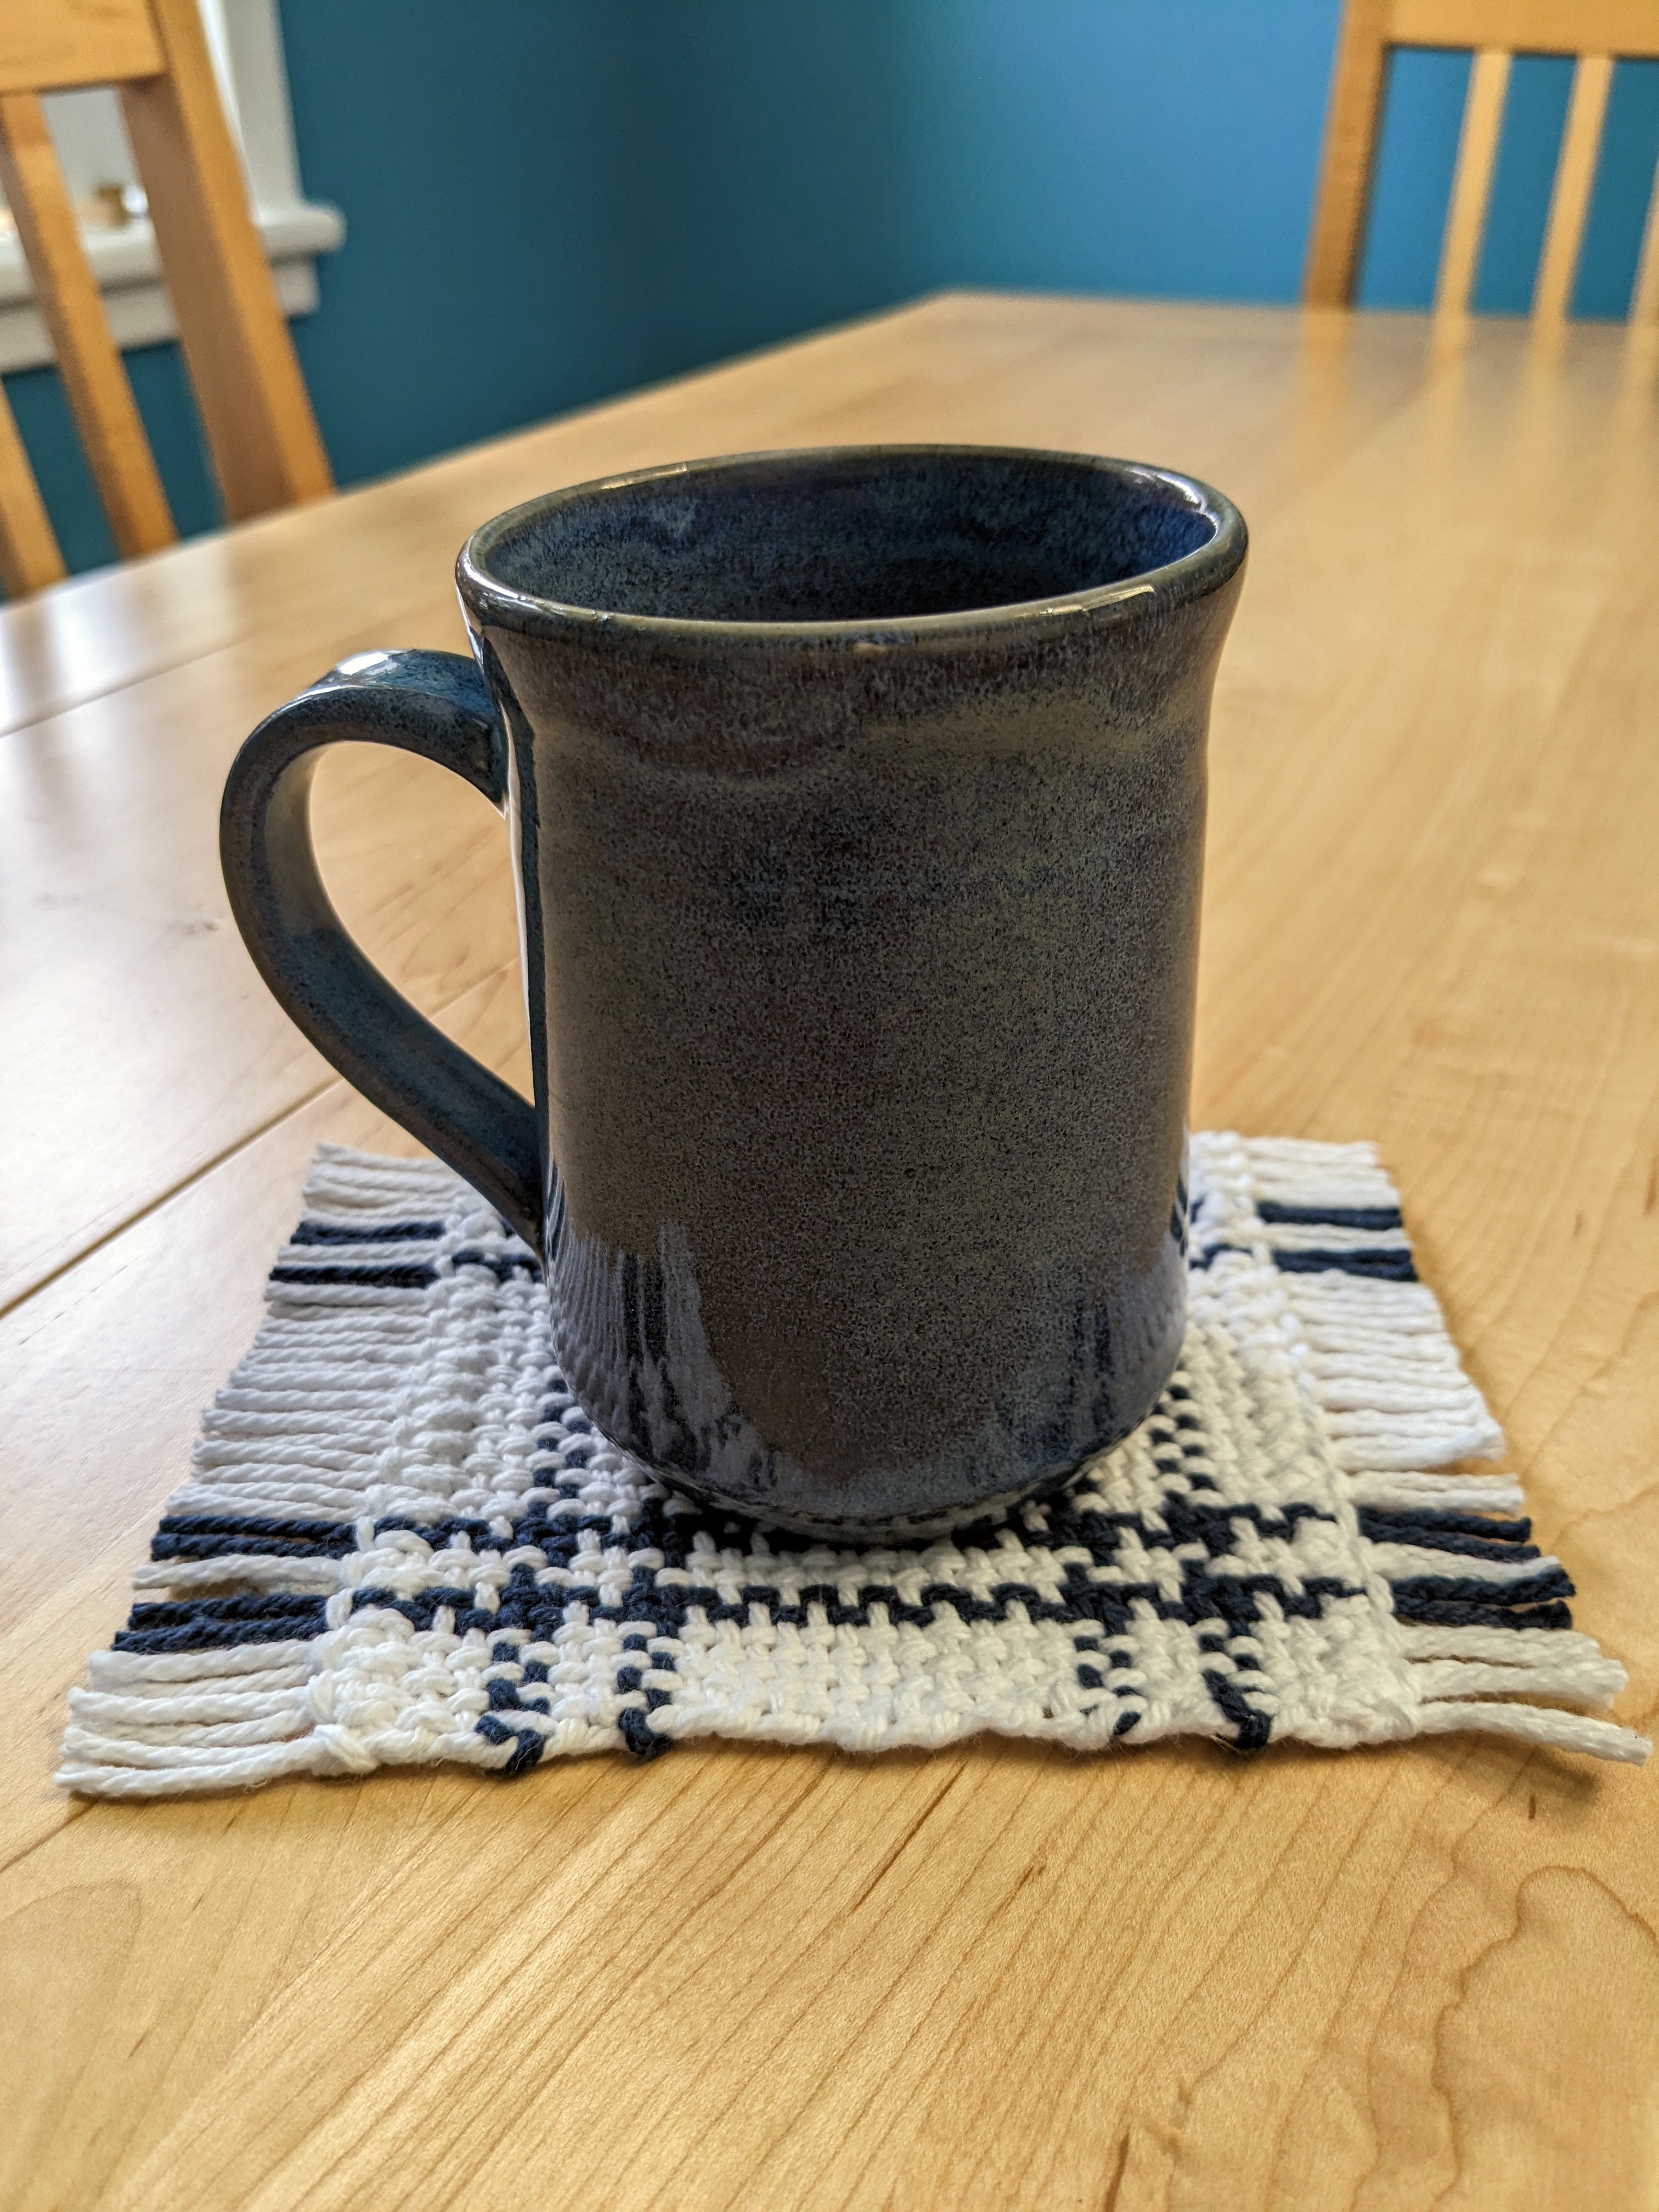 Photo of the coaster from this pattern being used with a blue pottery mug